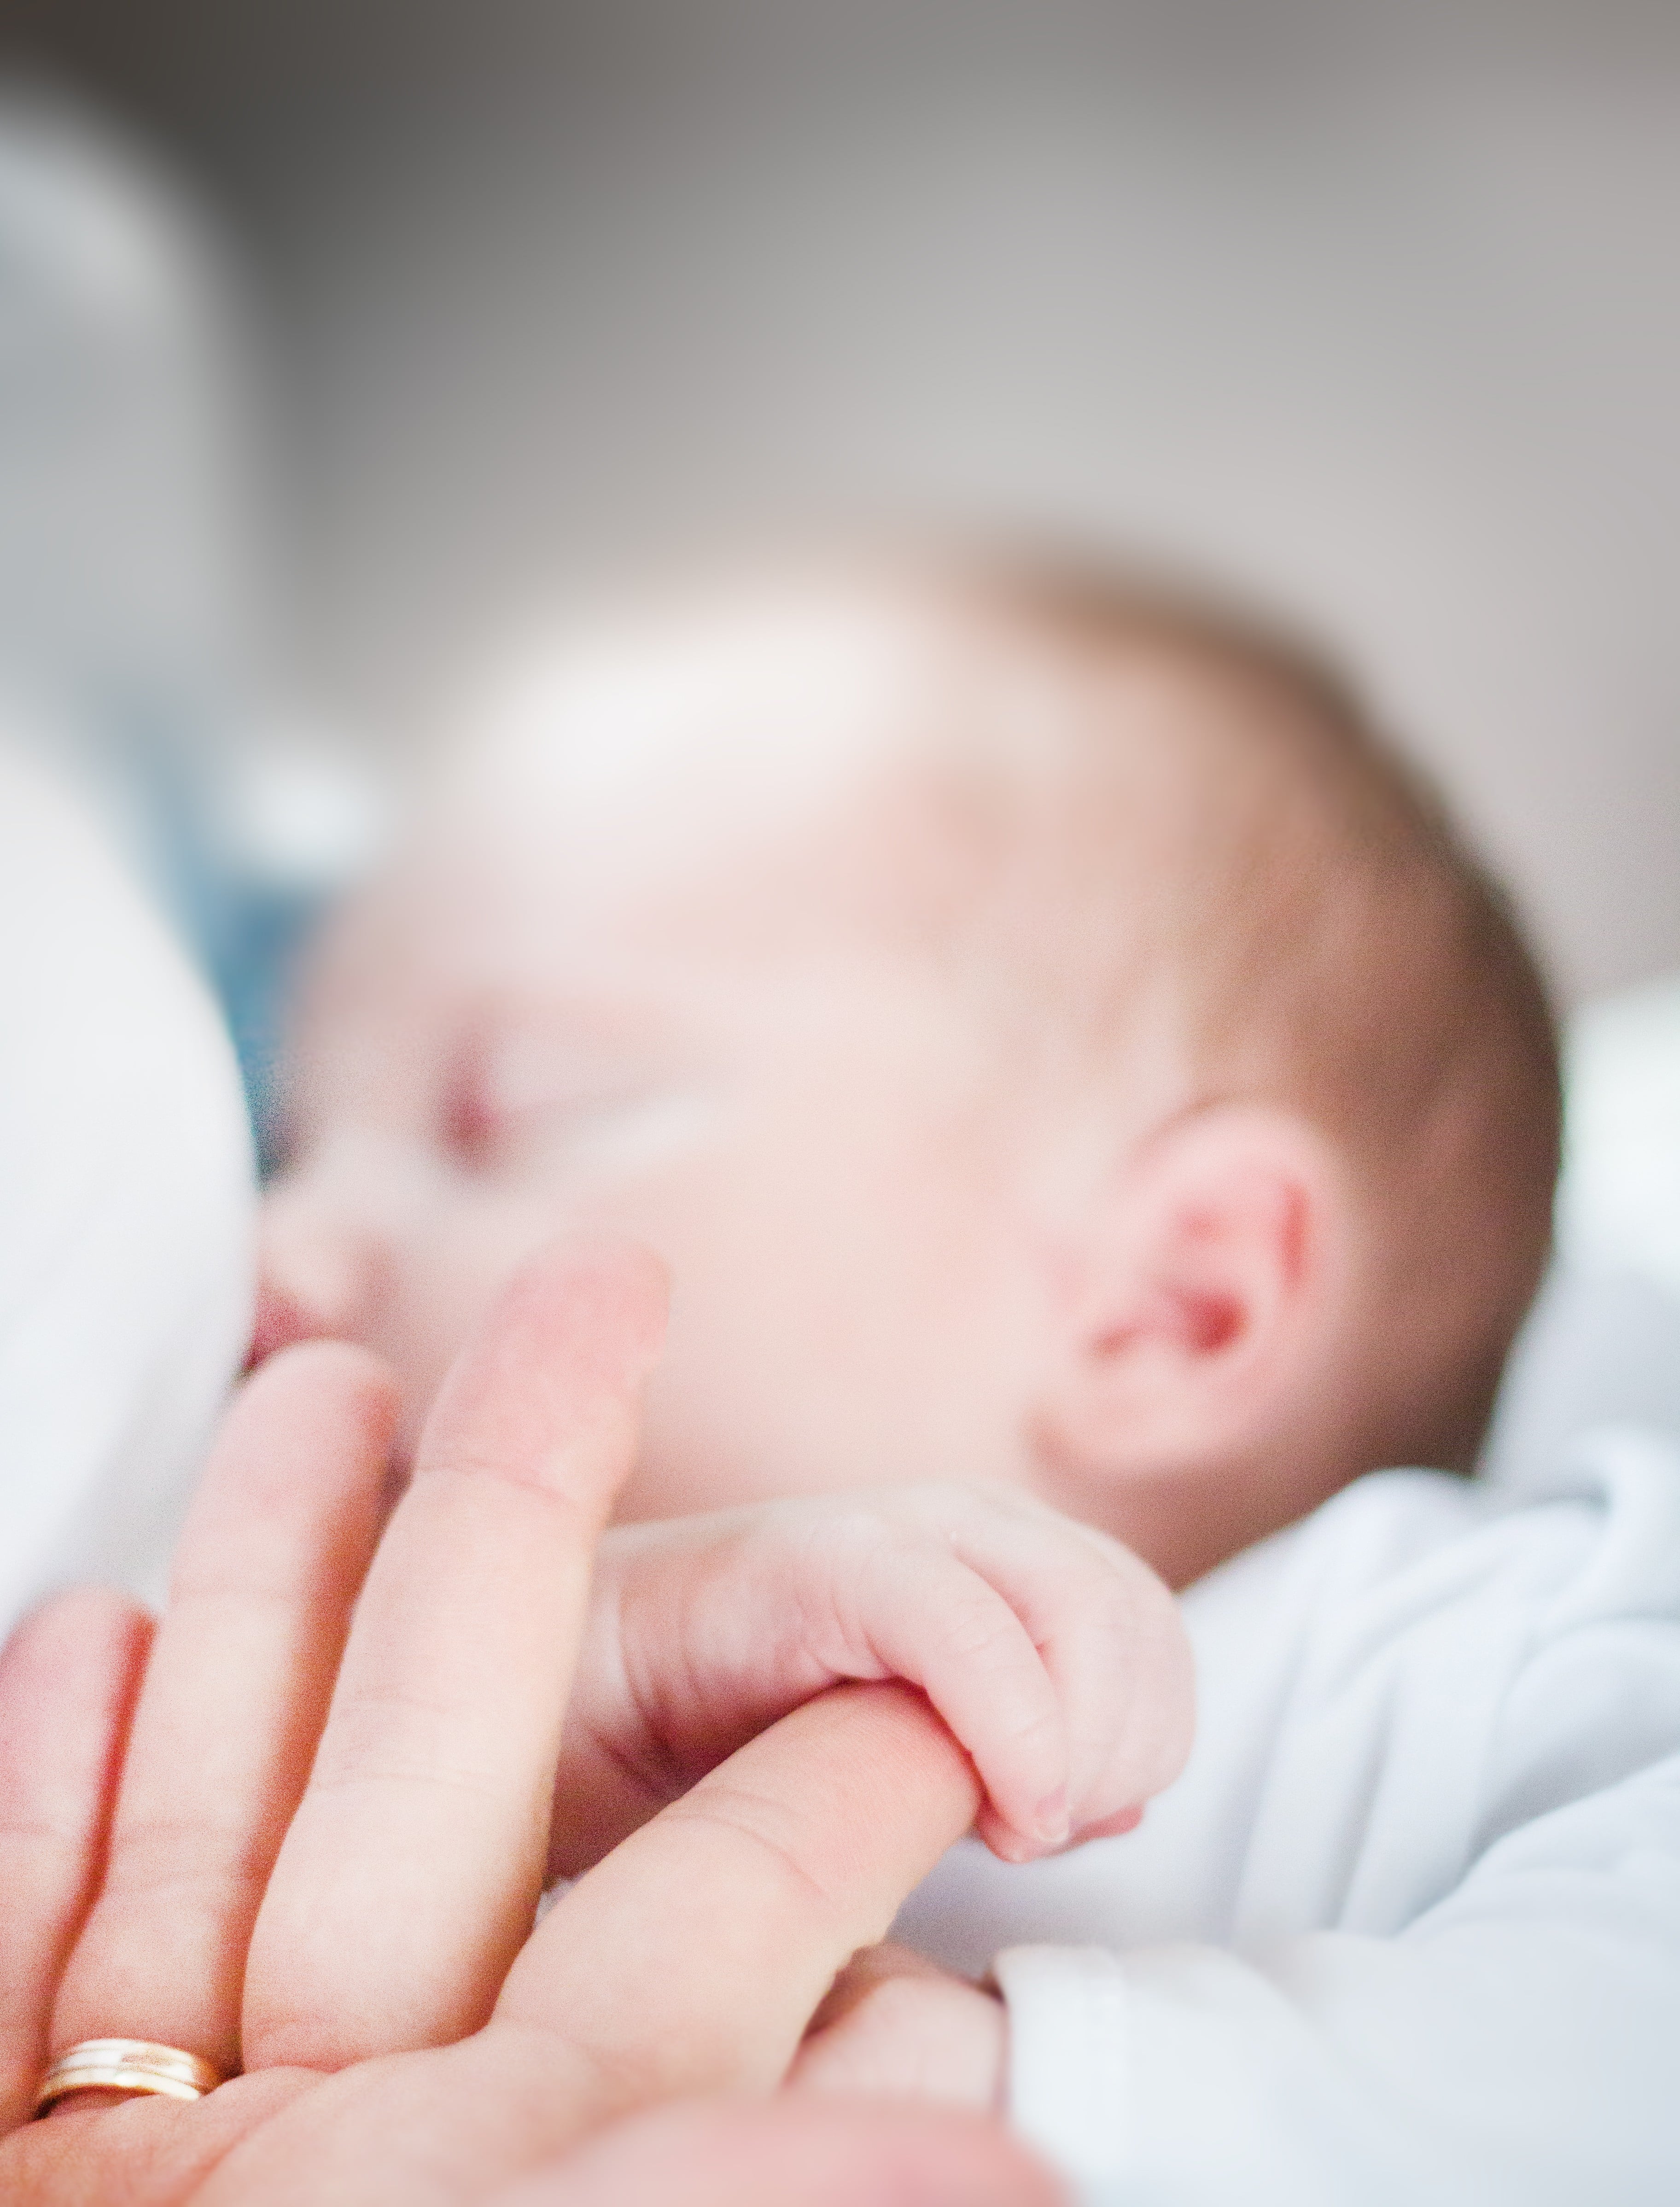 5 Tips for Getting Your Baby to Sleep Without Nursing - POPSUGAR